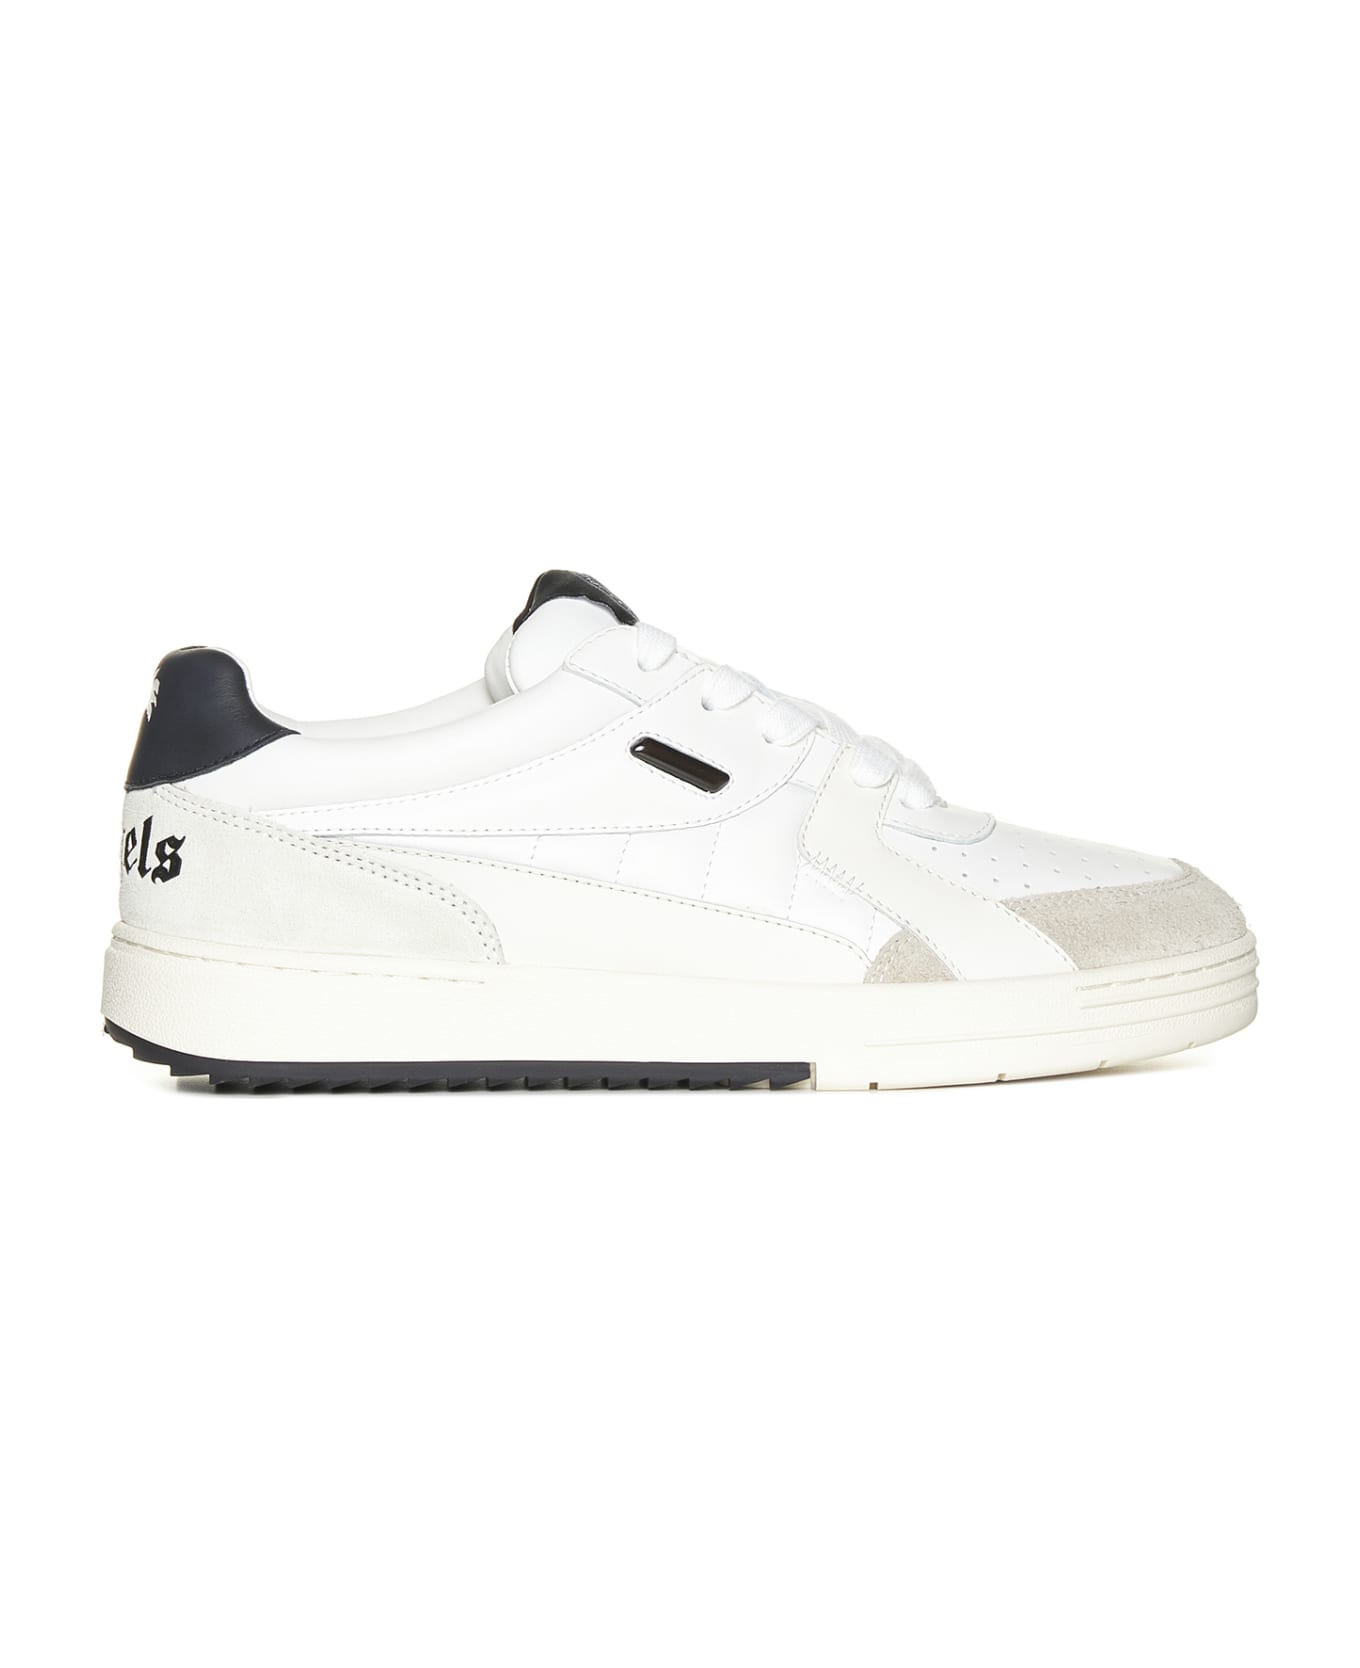 Palm Angels Sneakers - White BLACK